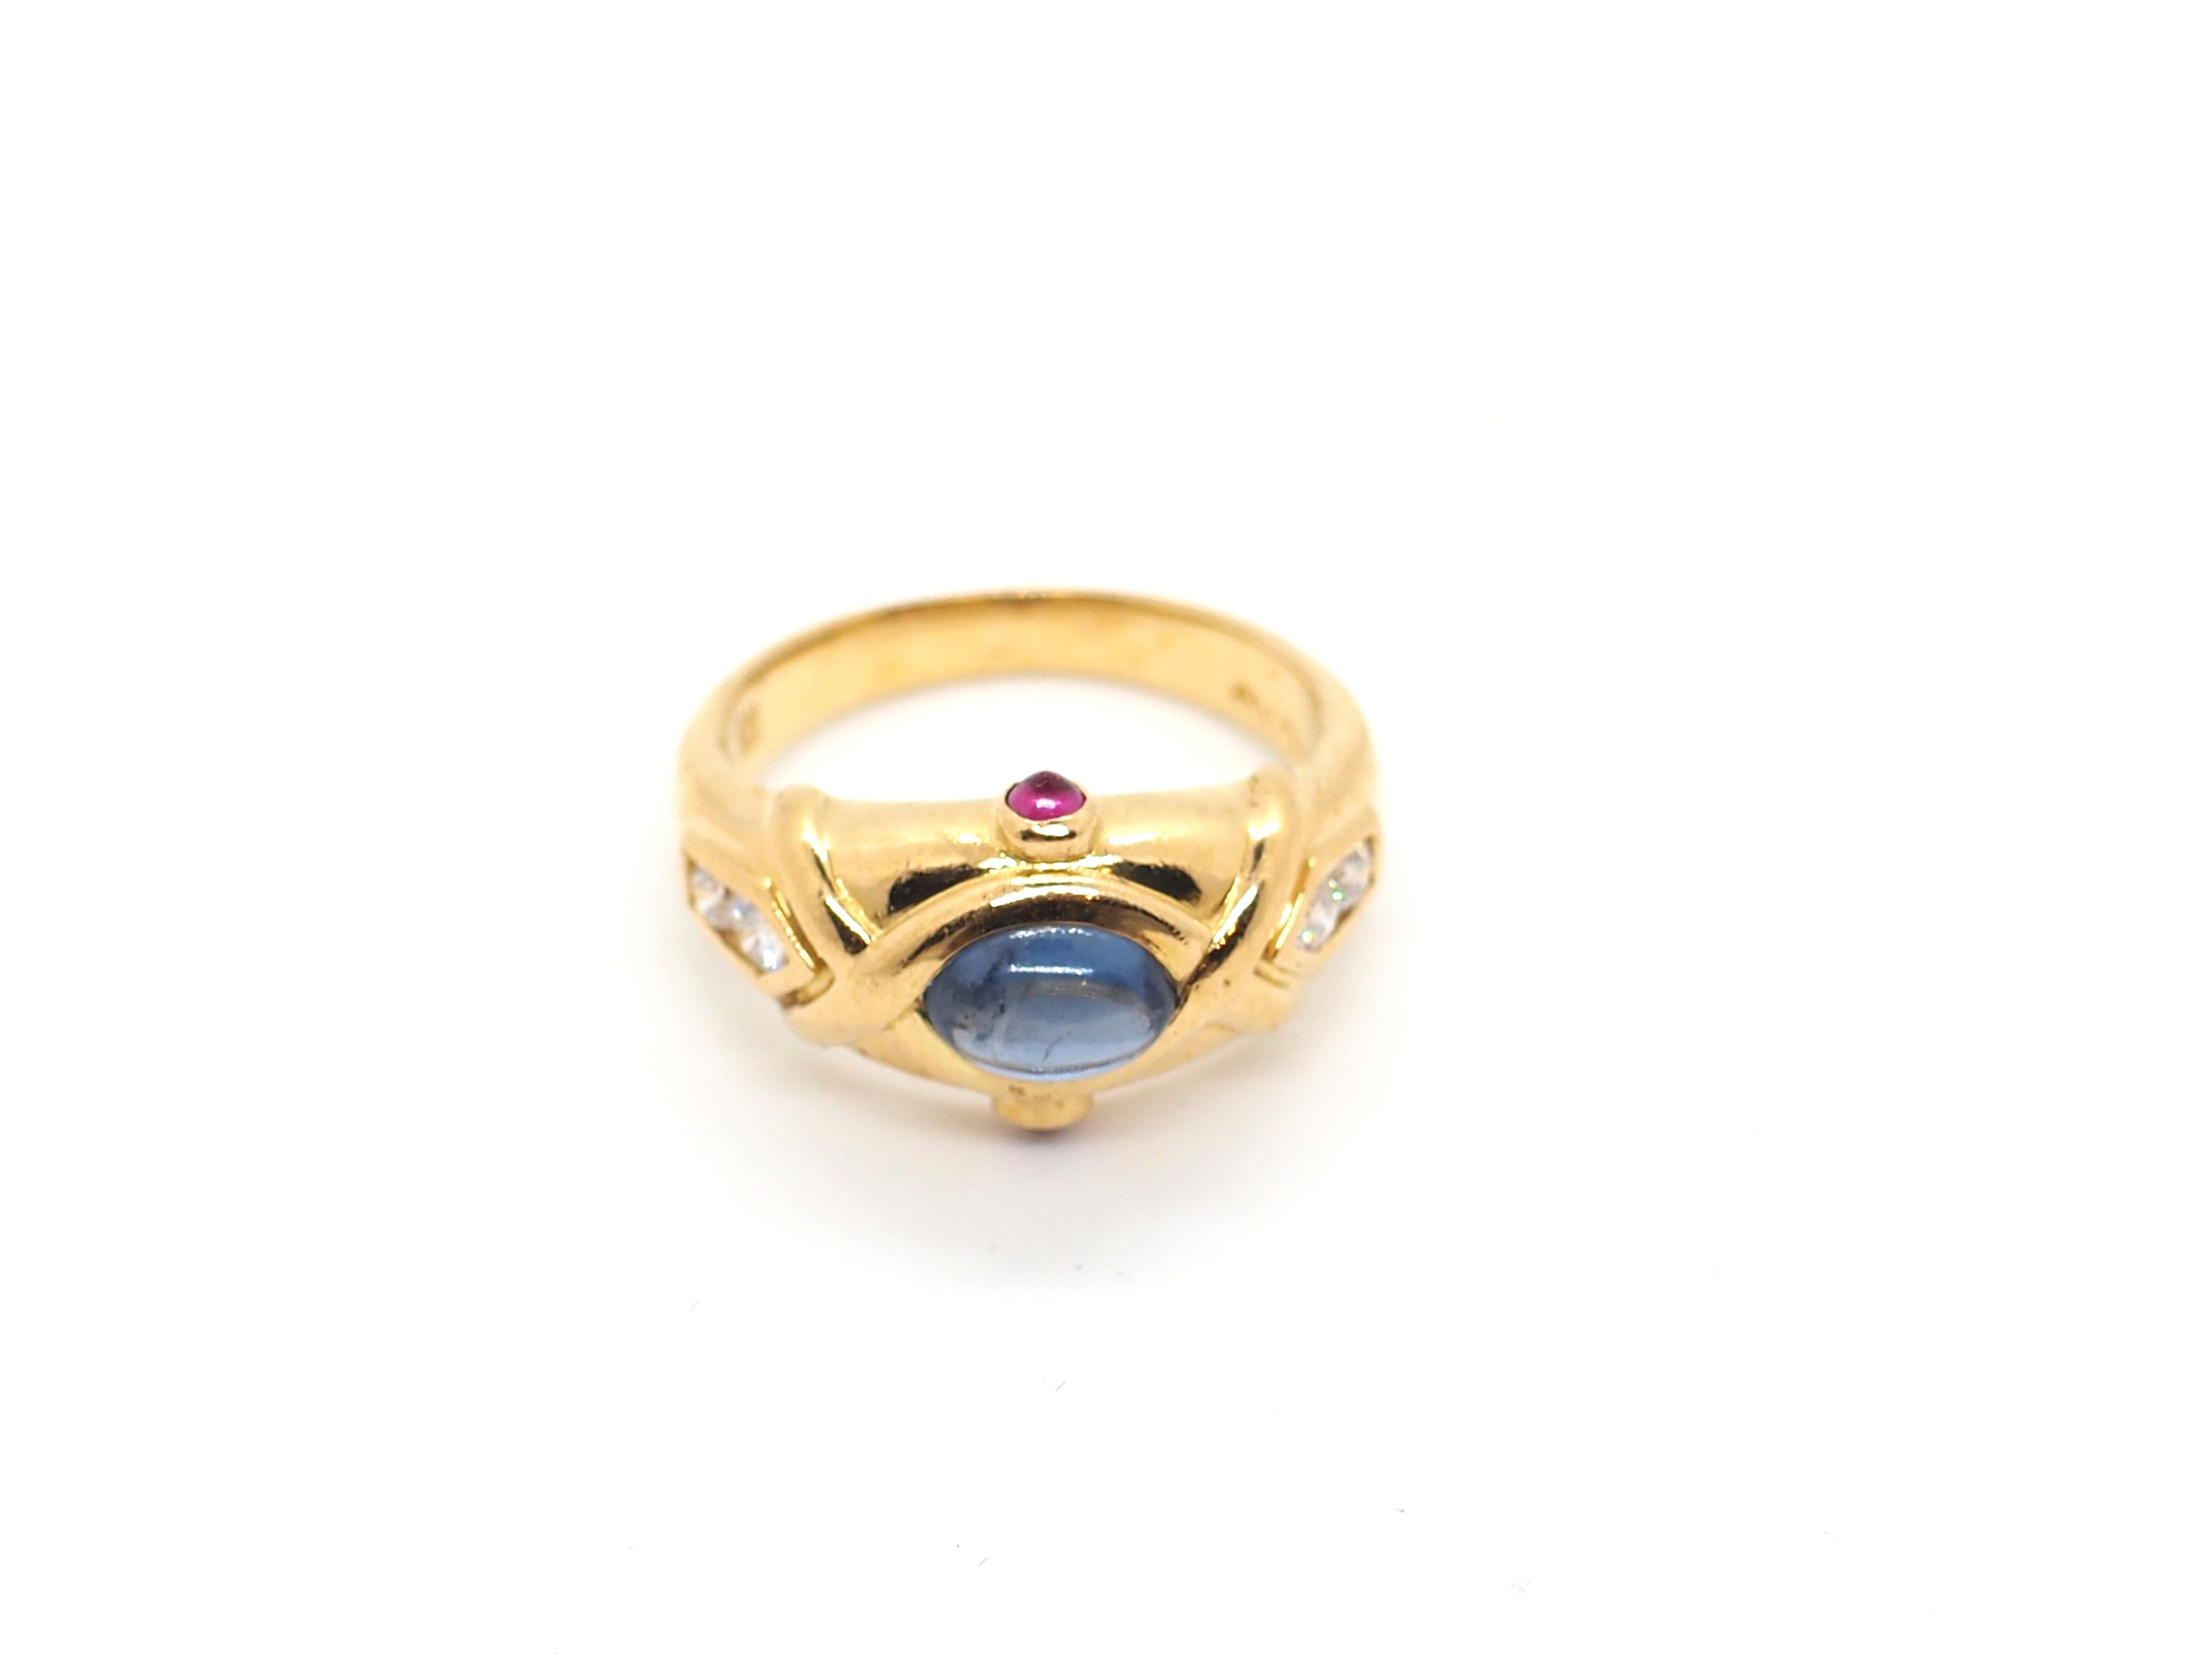 Step into the world of vintage luxury with this stunning Avakian House ring, meticulously crafted in radiant 18K yellow gold. At its center, a mesmerizing oval sapphire cabochon takes the spotlight, emanating timeless elegance and